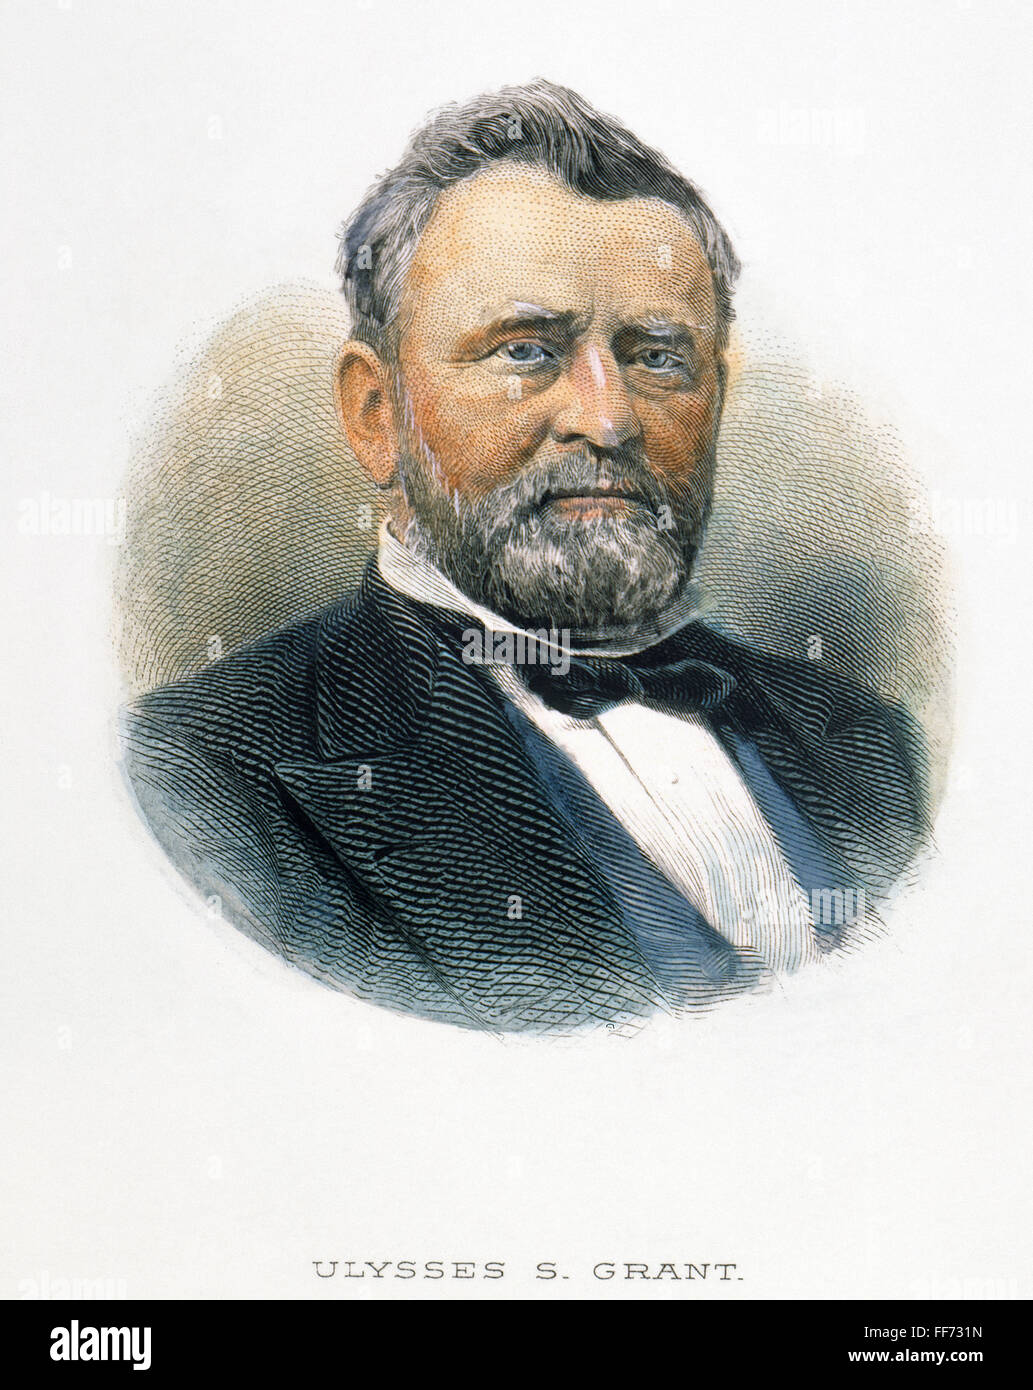 ULYSSES S. GRANT /n(1822-1885). Contemporary line engraving. Stock Photo